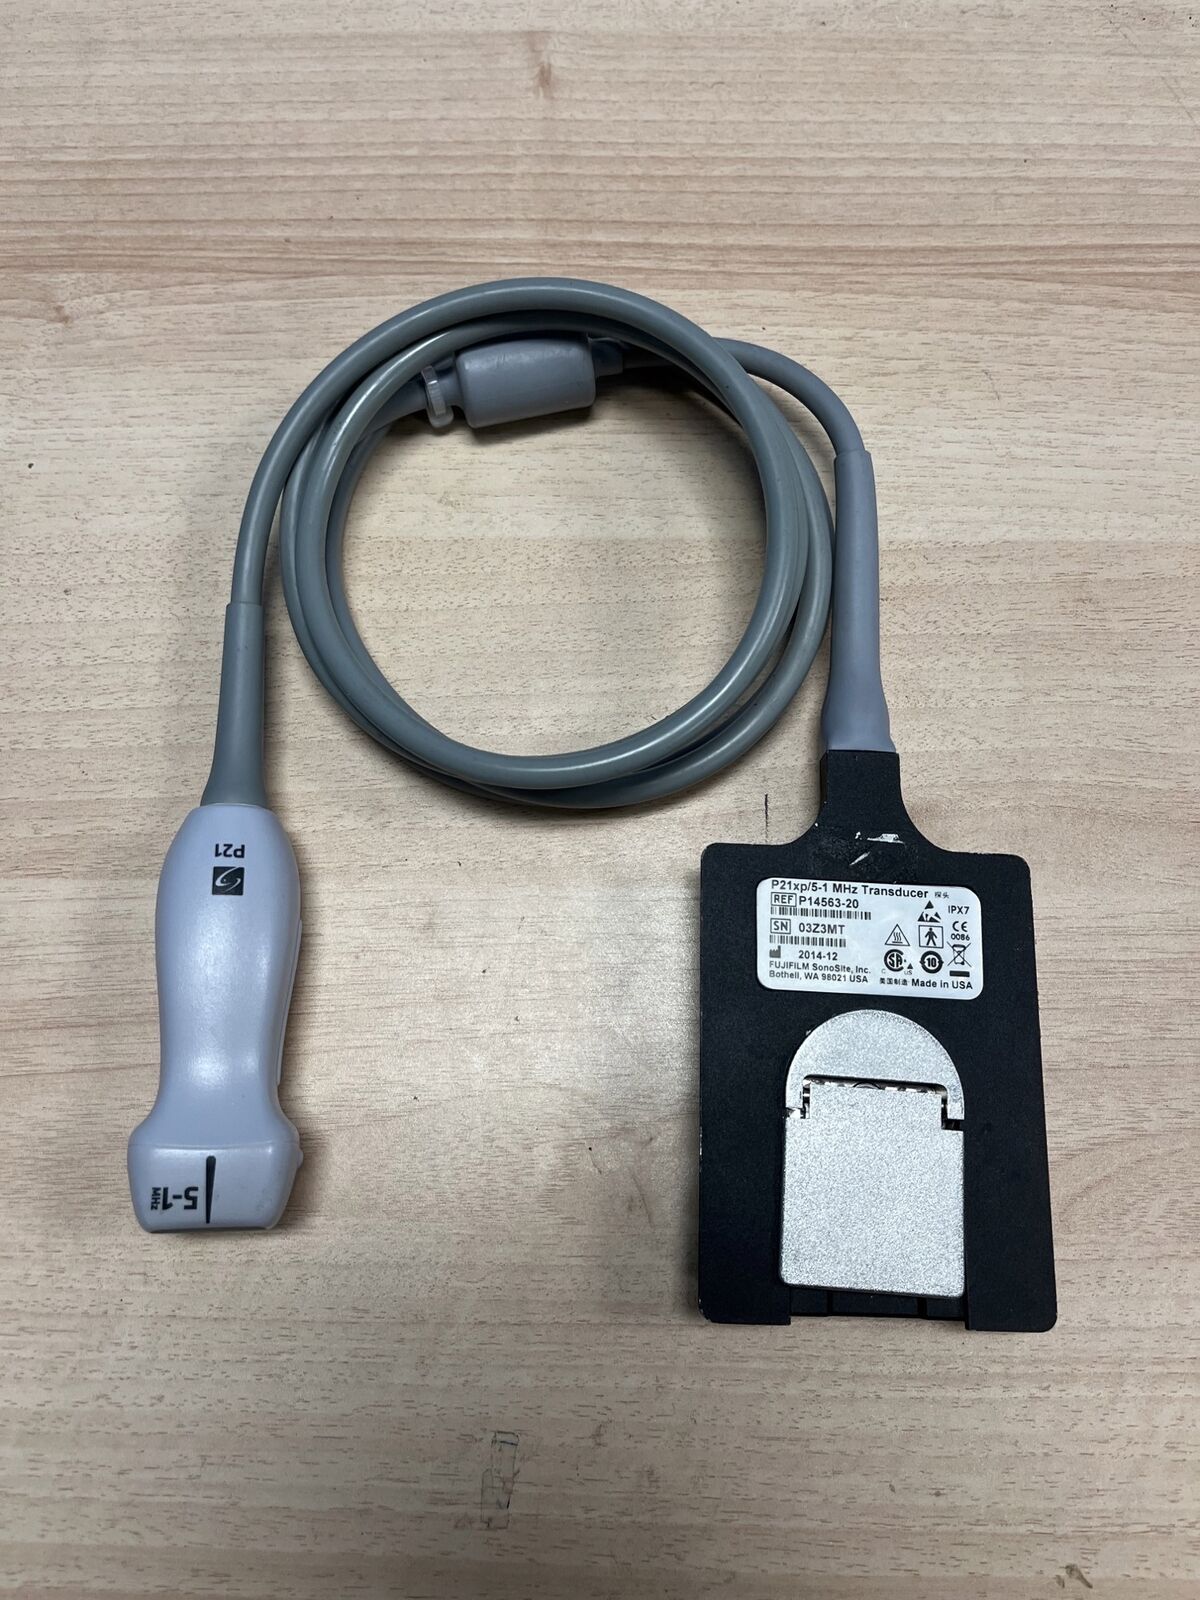 SonoSite P21Xp Phased Array Probe Transducer for X-Porte 2014 DIAGNOSTIC ULTRASOUND MACHINES FOR SALE